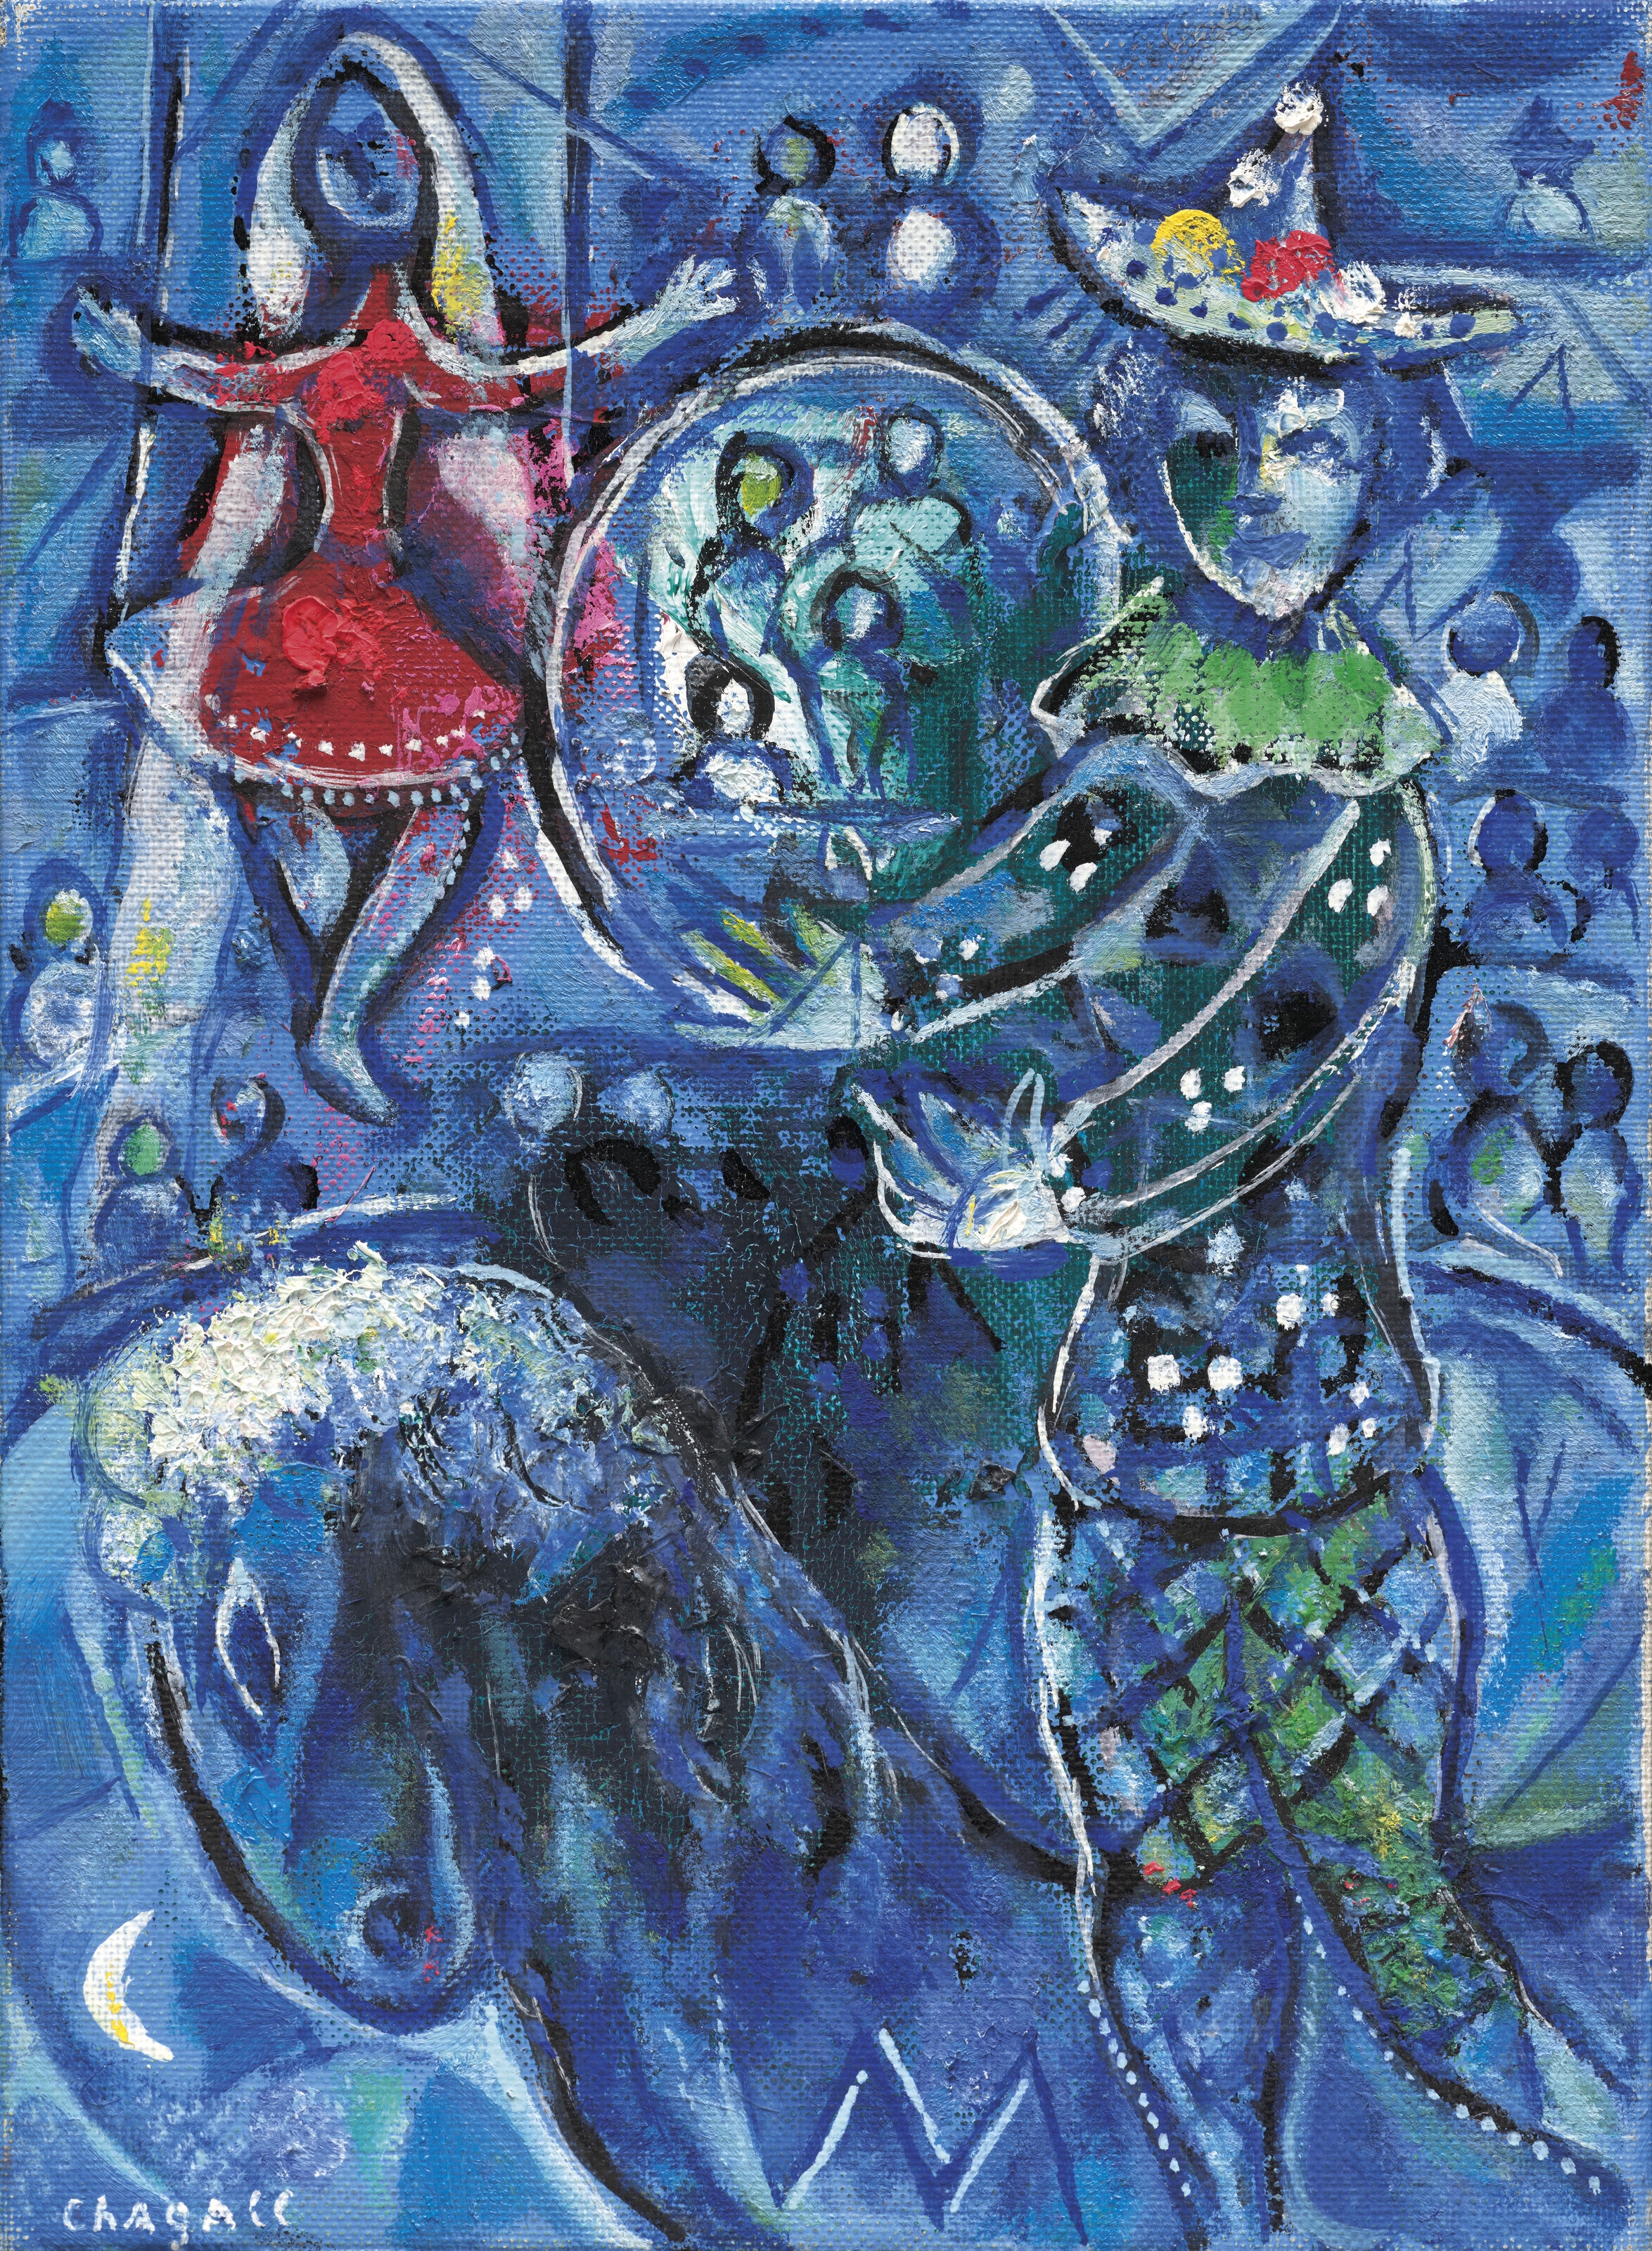 Artwork by Marc Chagall, Le Cirque sur fond bleu, Made of oil and bursh and India ink on canvas